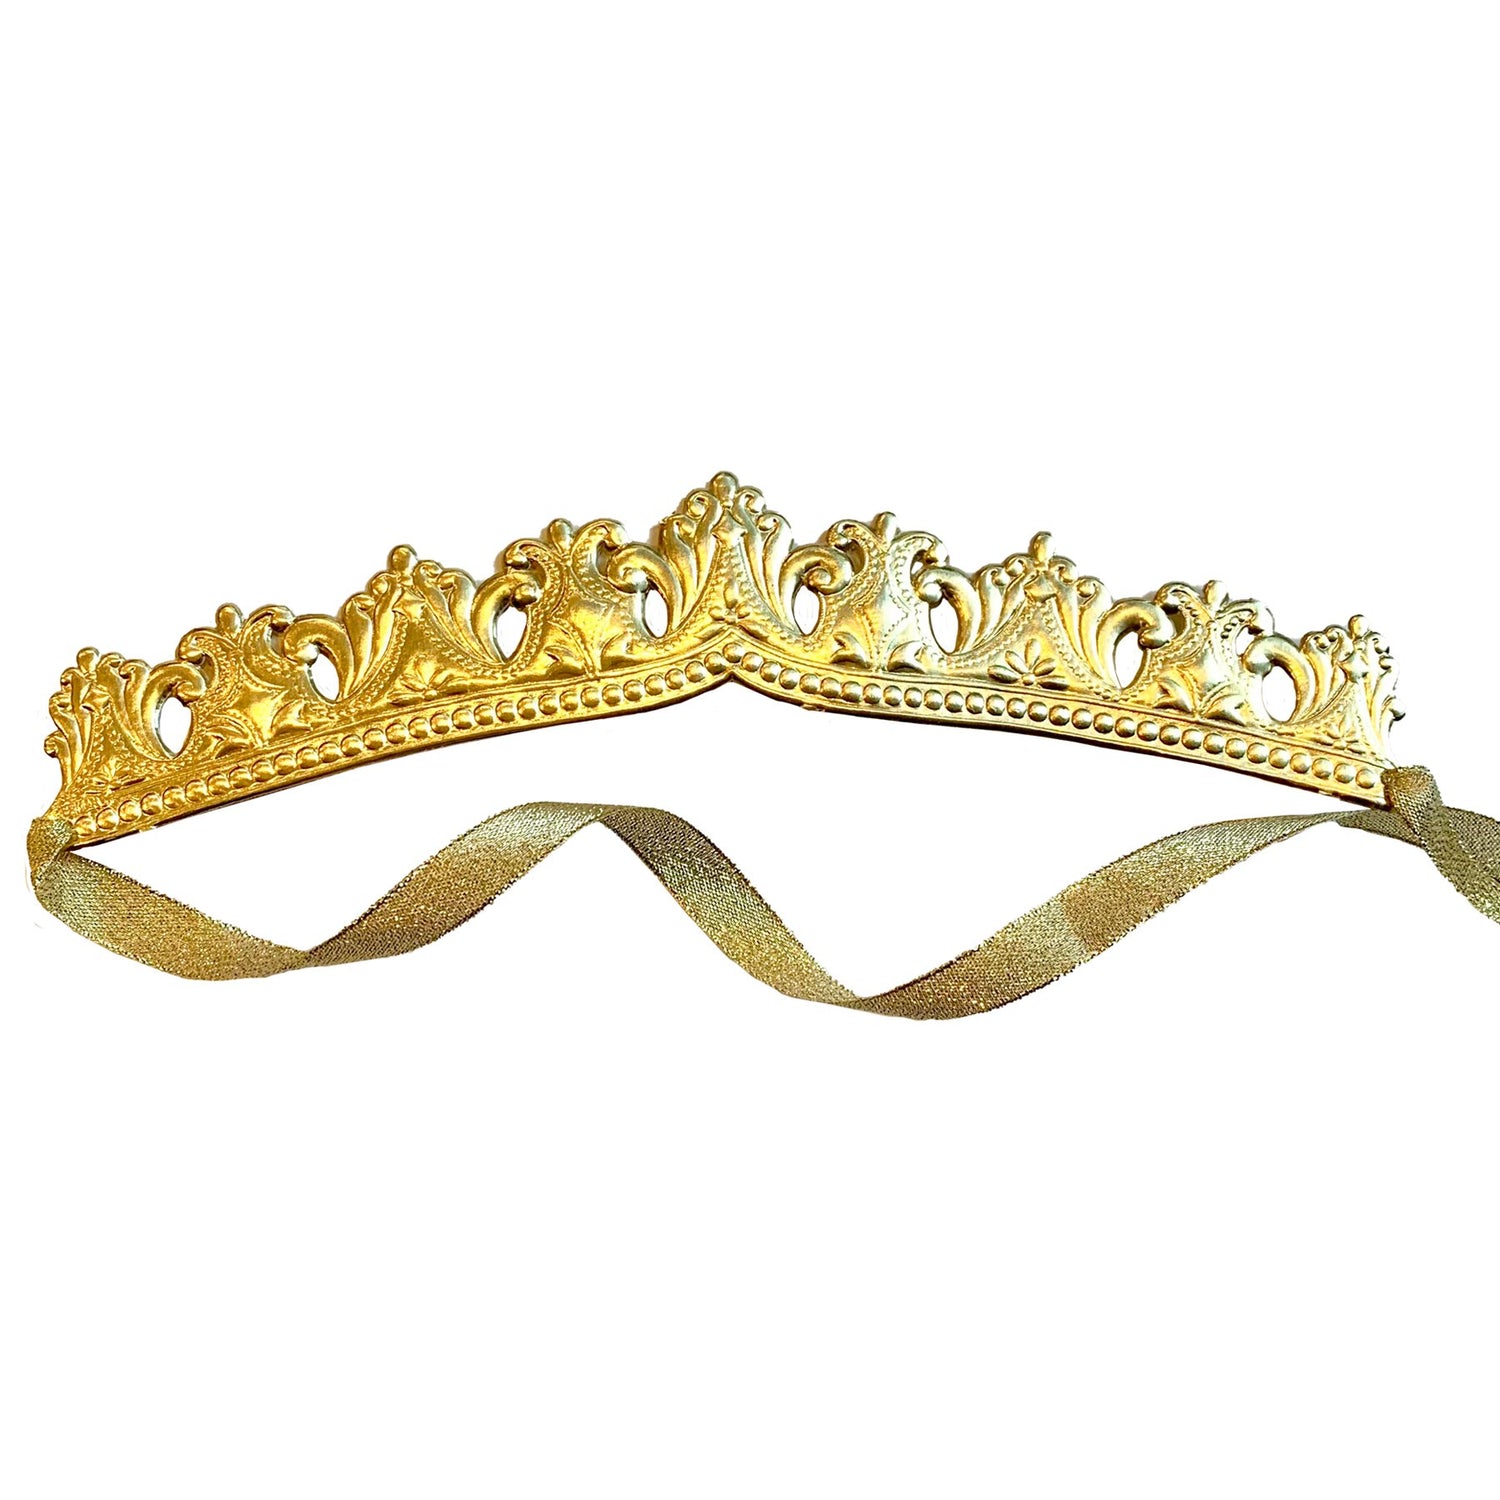 Crown Embossed Gold from Europe